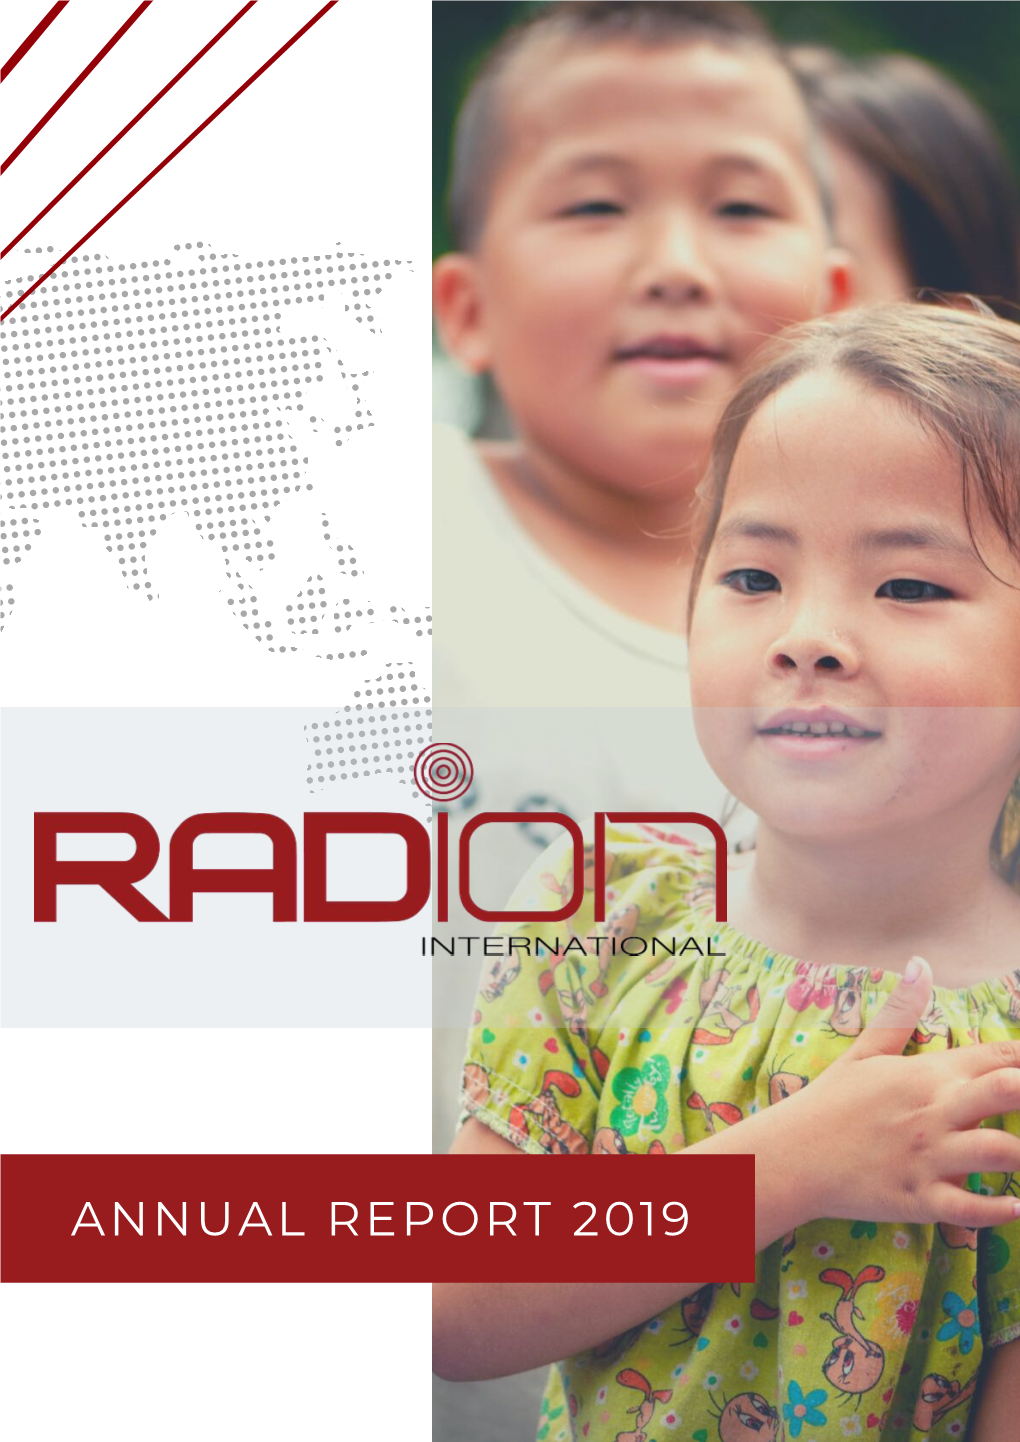 ANNUAL REPORT 2019 We Are Radion